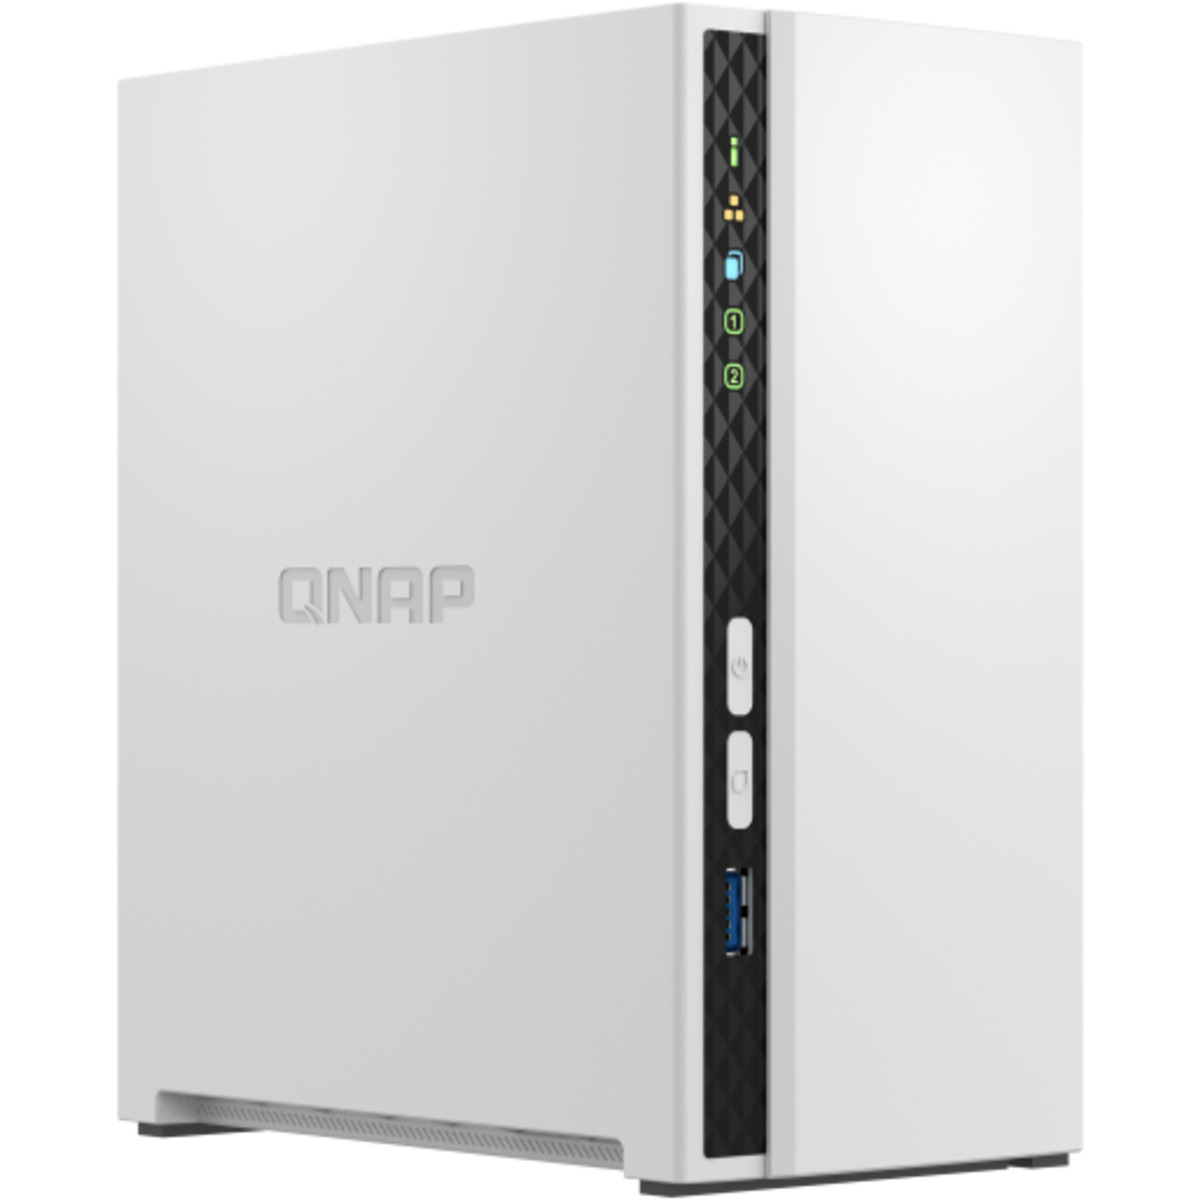 QNAP TS-233 32tb 2-Bay Desktop Personal / Basic Home / Small Office NAS - Network Attached Storage Device 2x16tb Toshiba Enterprise Capacity MG08ACA16TE 3.5 7200rpm SATA 6Gb/s HDD ENTERPRISE Class Drives Installed - Burn-In Tested TS-233